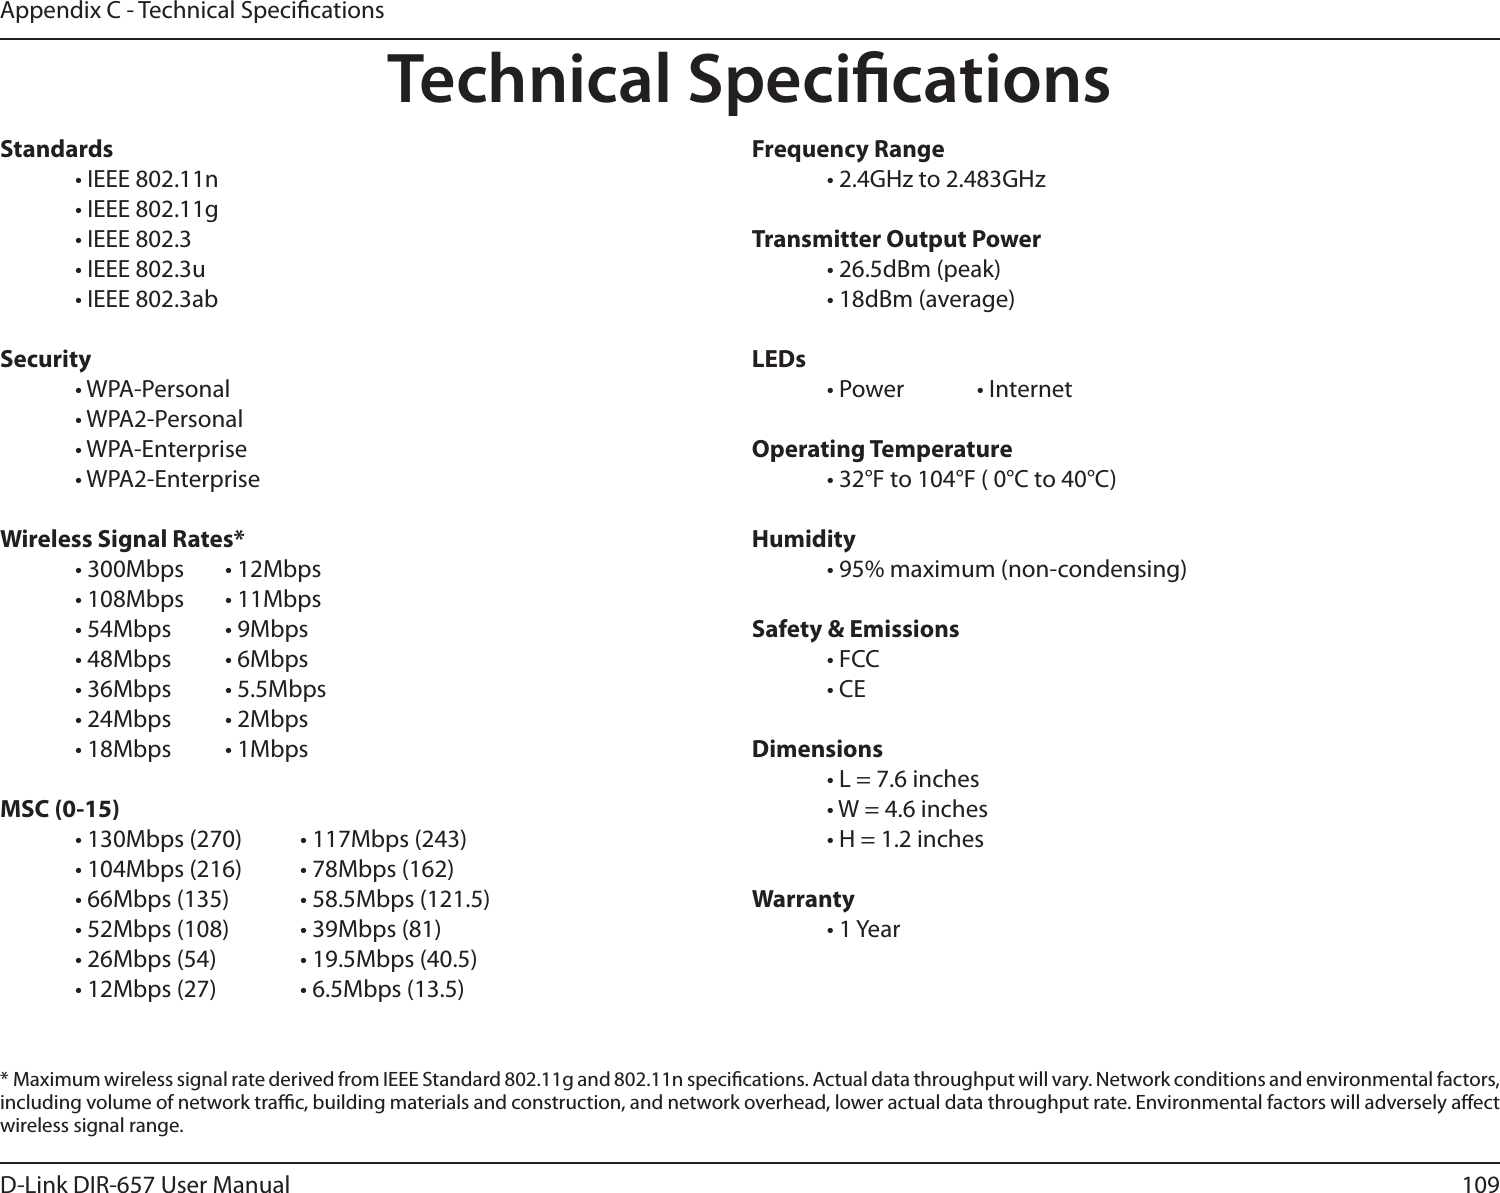 109D-Link DIR-657 User ManualAppendix C - Technical SpecicationsTechnical SpecicationsStandards  • IEEE 802.11n  • IEEE 802.11g  • IEEE 802.3  • IEEE 802.3u  • IEEE 802.3abSecurity  • WPA-Personal  • WPA2-Personal  • WPA-Enterprise  • WPA2-Enterprise Wireless Signal Rates*  • 300Mbps  • 12Mbps • 108Mbps   • 11Mbps  • 54Mbps   • 9Mbps  • 48Mbps  • 6Mbps  • 36Mbps  • 5.5Mbps  • 24Mbps  • 2Mbps        • 18Mbps   • 1Mbps        MSC (0-15)  • 130Mbps (270)  • 117Mbps (243)  • 104Mbps (216)  • 78Mbps (162)  • 66Mbps (135)  • 58.5Mbps (121.5)  • 52Mbps (108)  • 39Mbps (81)  • 26Mbps (54)   • 19.5Mbps (40.5)  • 12Mbps (27)   • 6.5Mbps (13.5) Frequency Range  • 2.4GHz to 2.483GHzTransmitter Output Power  • 26.5dBm (peak)  • 18dBm (average)LEDs  • Power   • Internet     Operating Temperature  • 32°F to 104°F ( 0°C to 40°C)Humidity  • 95% maximum (non-condensing)Safety &amp; Emissions  • FCC  • CEDimensions  • L = 7.6 inches  • W = 4.6 inches  • H = 1.2 inchesWarranty  • 1 Year*  Maximum wireless signal rate derived from IEEE Standard 802.11g and 802.11n specications. Actual data throughput will vary. Network conditions and environmental factors, including volume of network trac, building materials and construction, and network overhead, lower actual data throughput rate. Environmental factors will adversely aect wireless signal range.